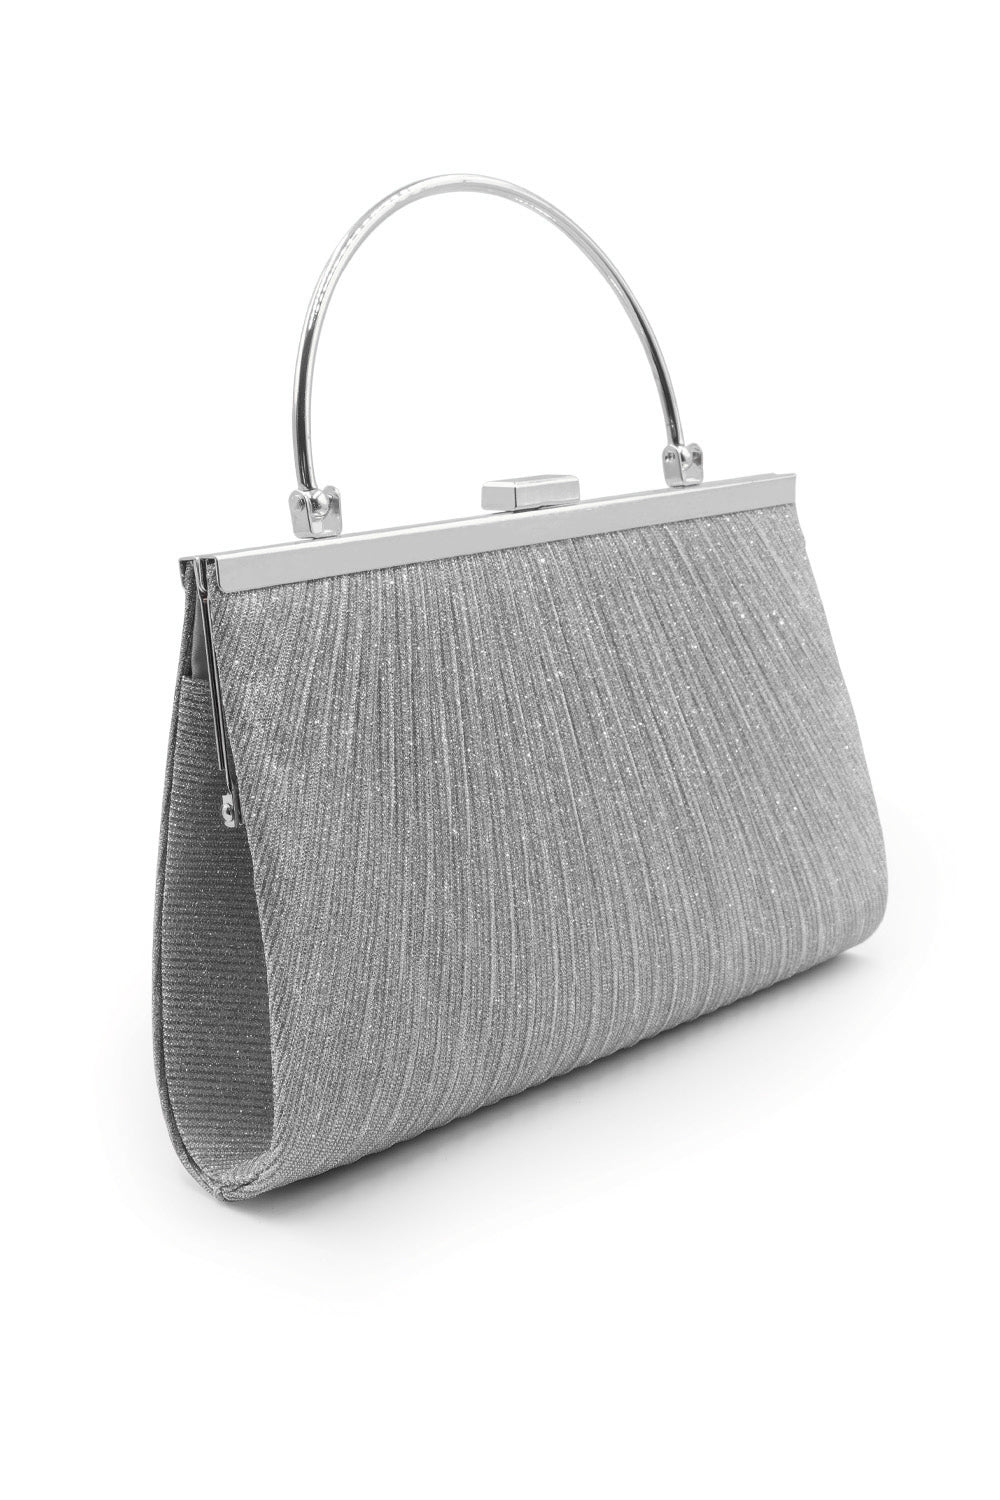 ELAINA CLUTCH WITH METAL HANDLE GRAB IN SILVER